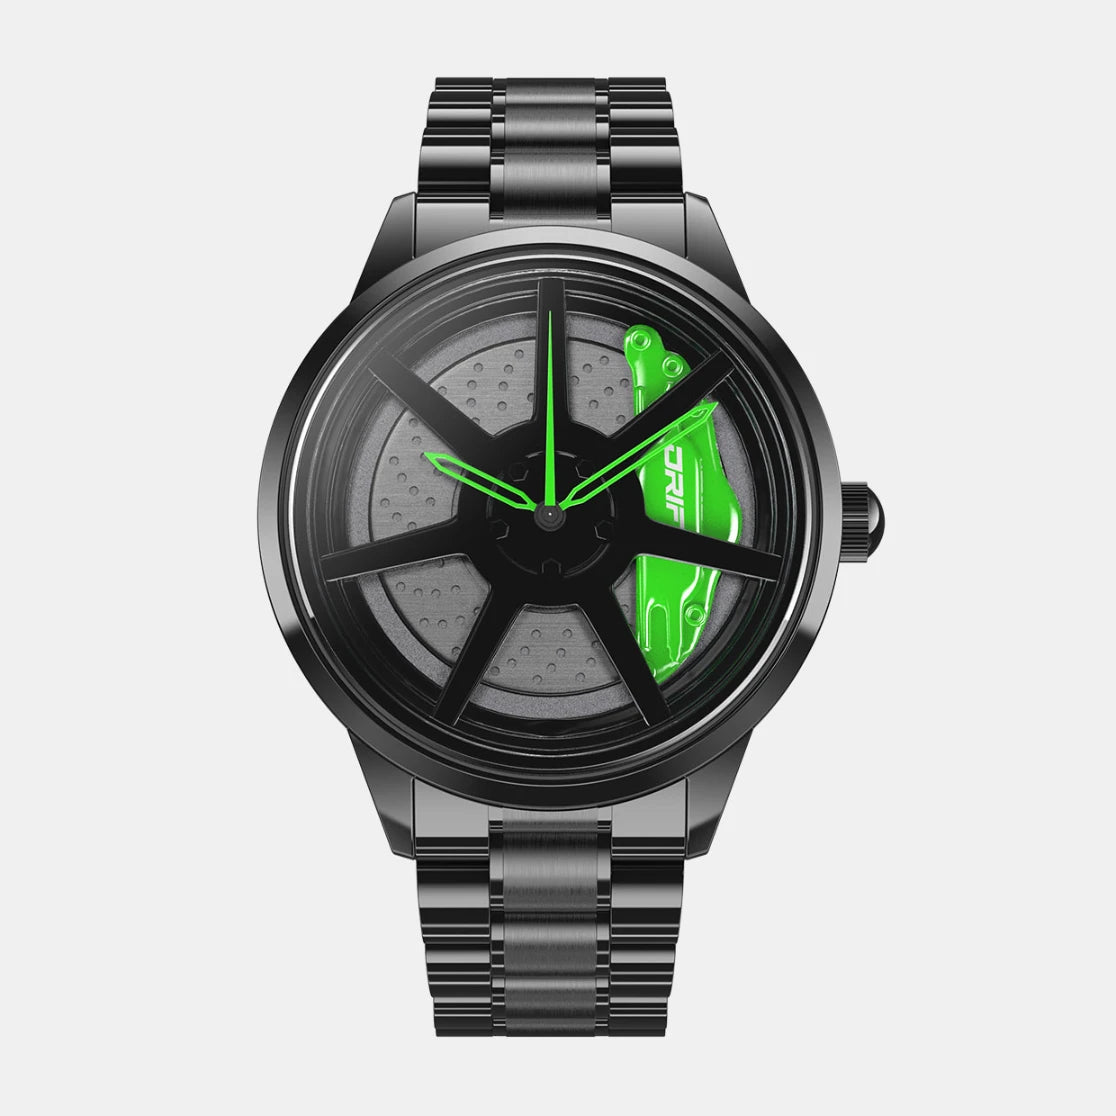 Illuminate your style with our green Drift Rim Watch! Crafted by a German startup, these precision watches feature innovative design, perfect for captivating motorsport, tuning, and auto enthusiasts. #id_46744374673738